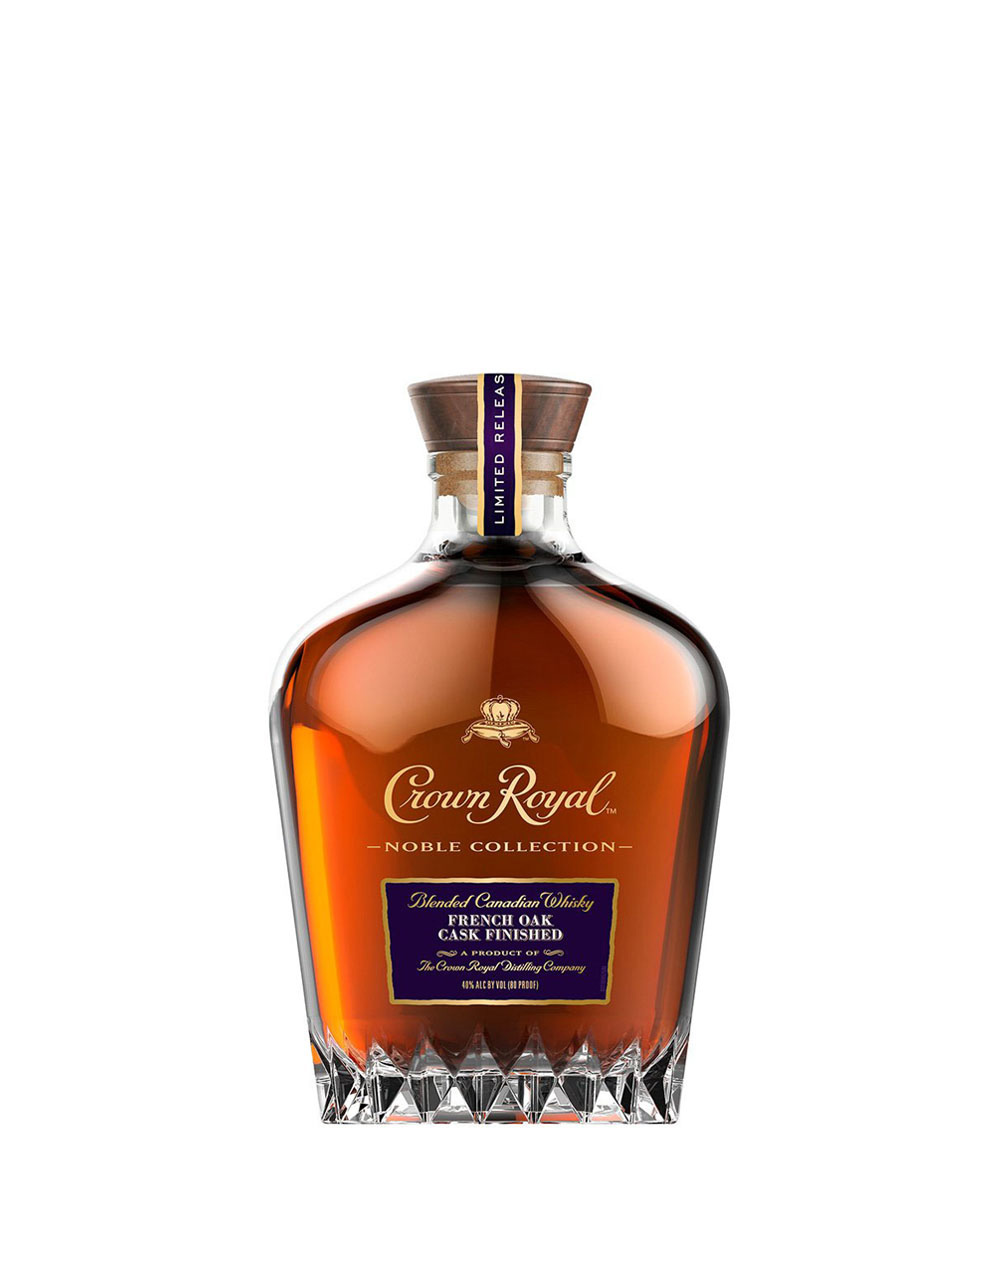 Crown Royal Noble Collection French Oak Cask Finished Whisky